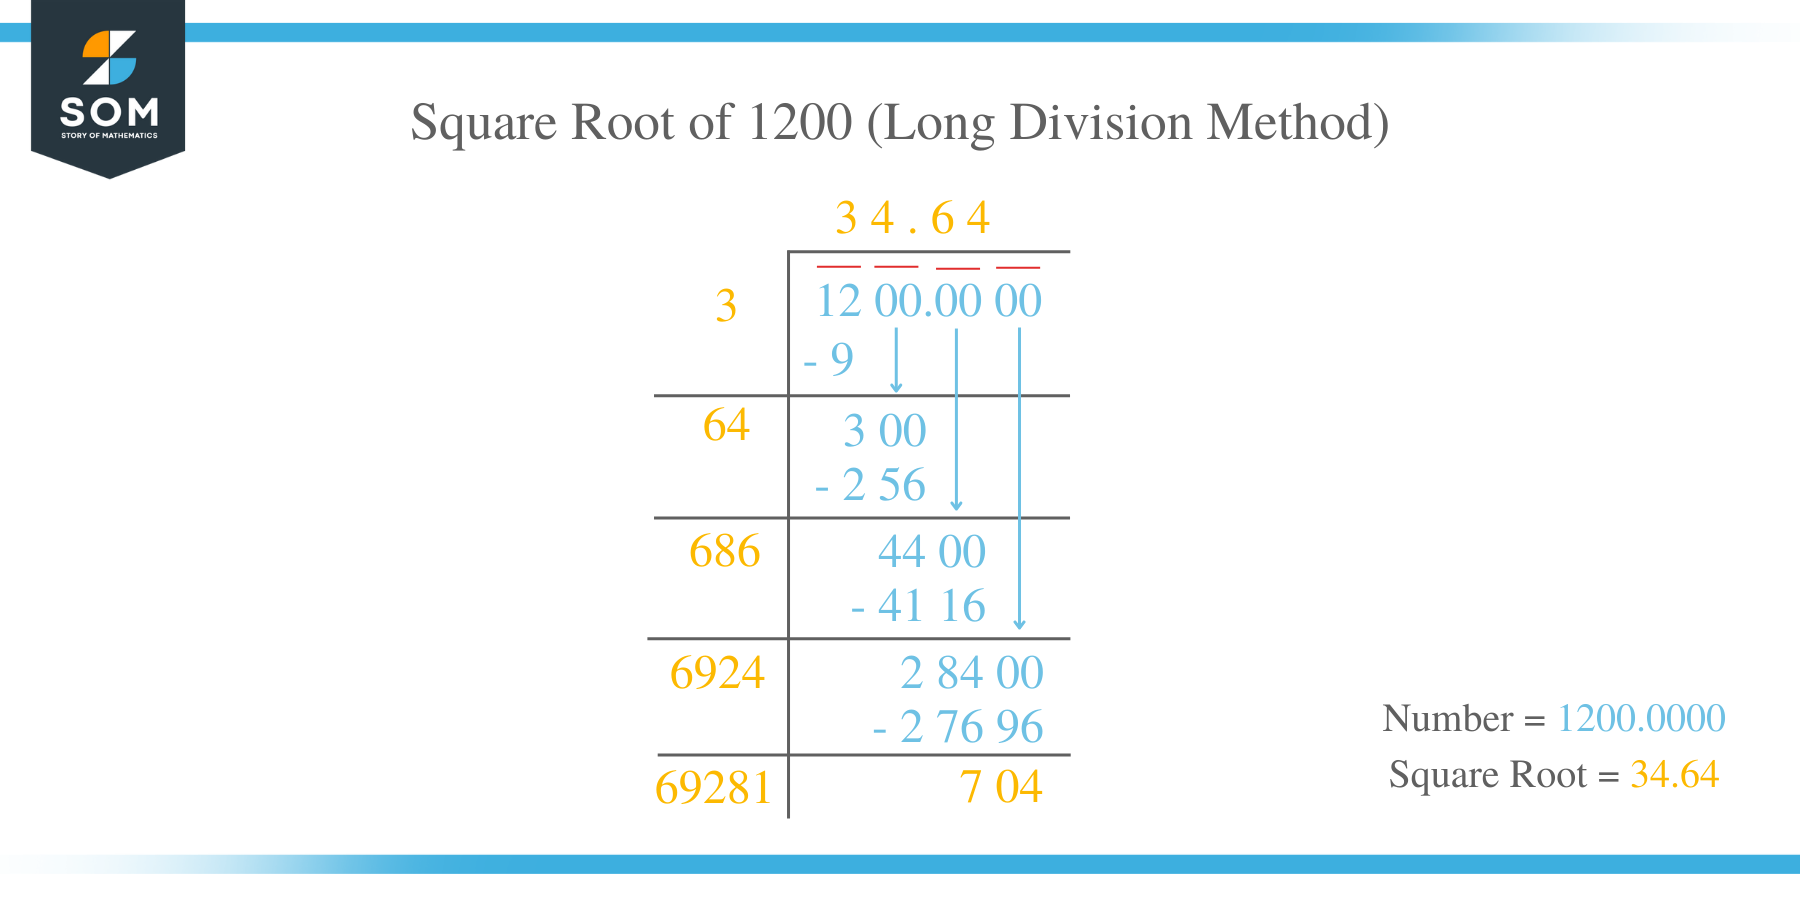 Square Root of 1200 by Long Division Method